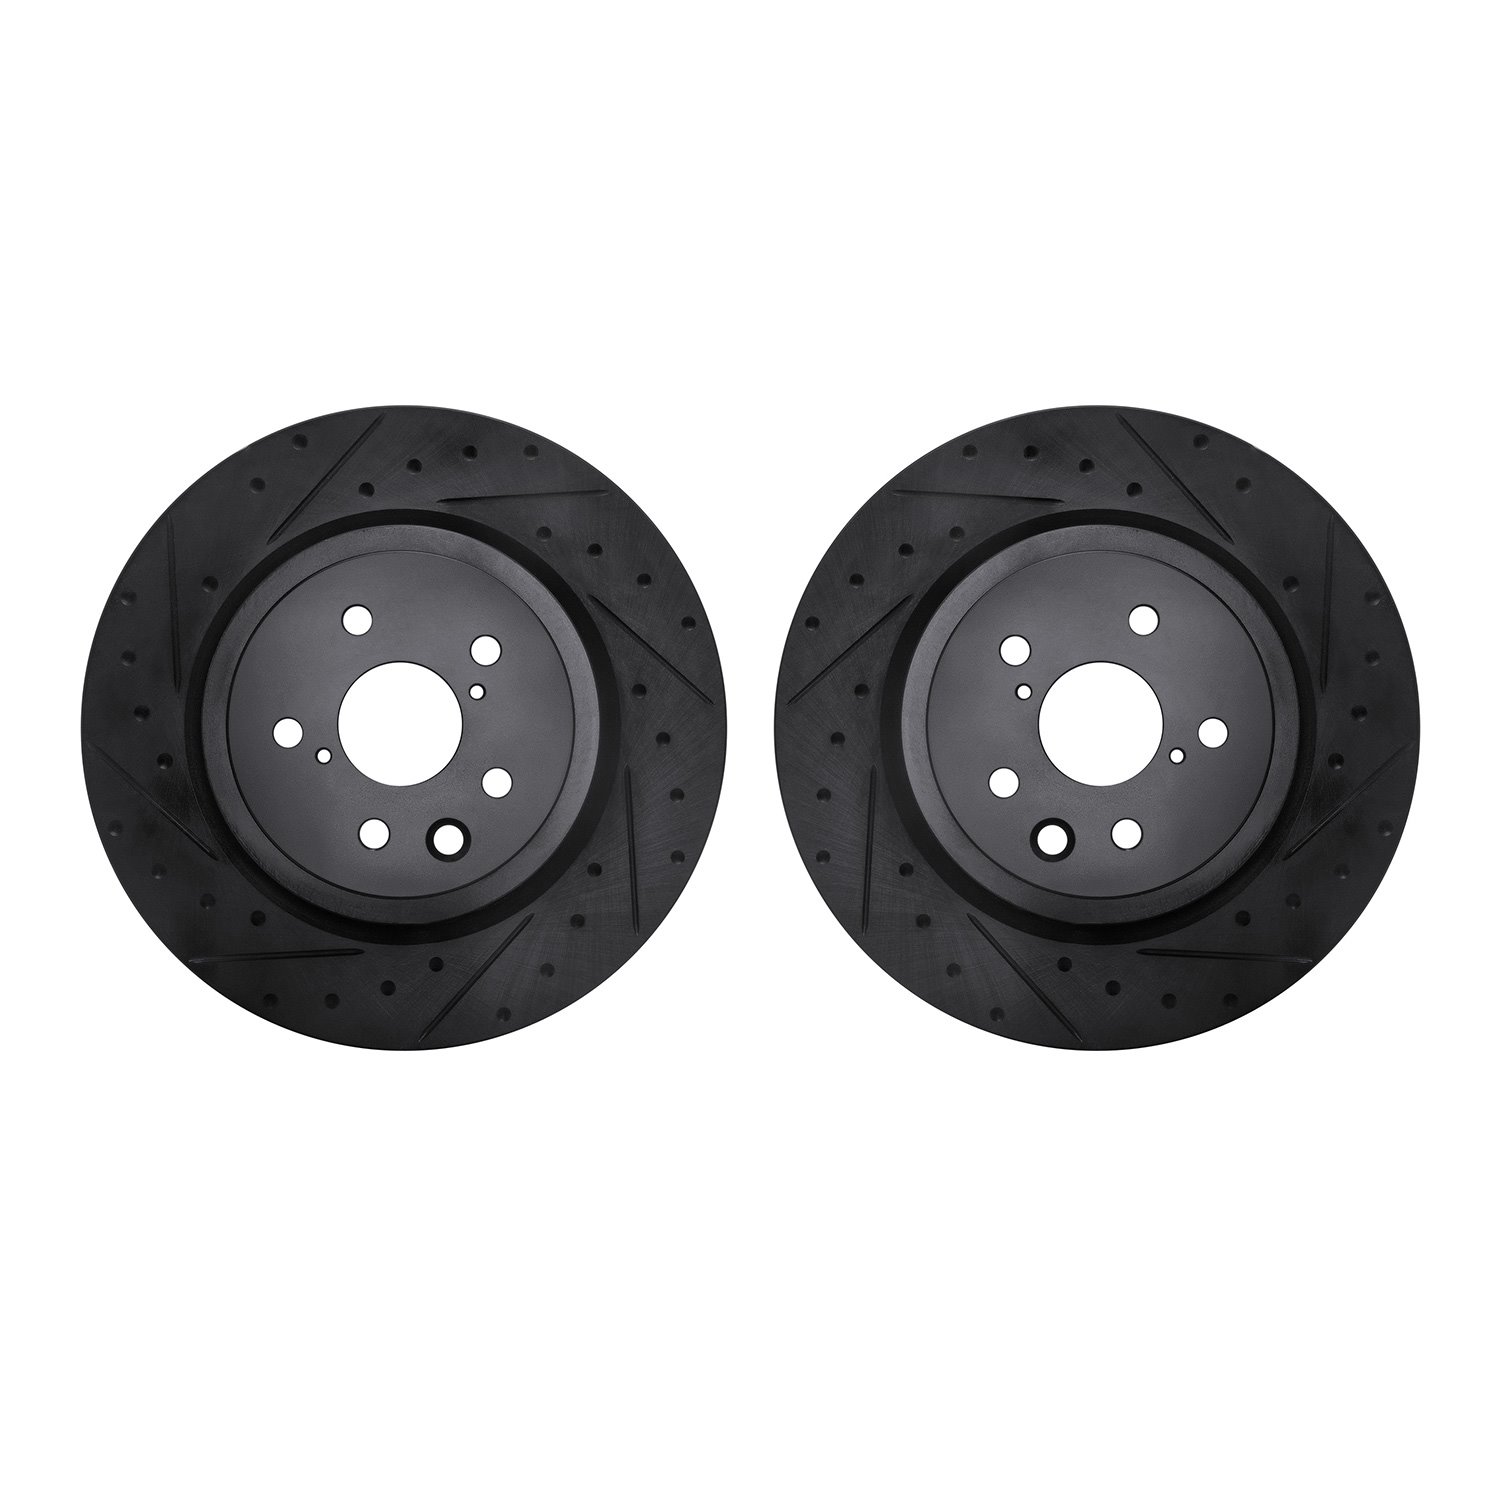 8002-75022 Drilled/Slotted Brake Rotors [Black], Fits Select Lexus/Toyota/Scion, Position: Rear